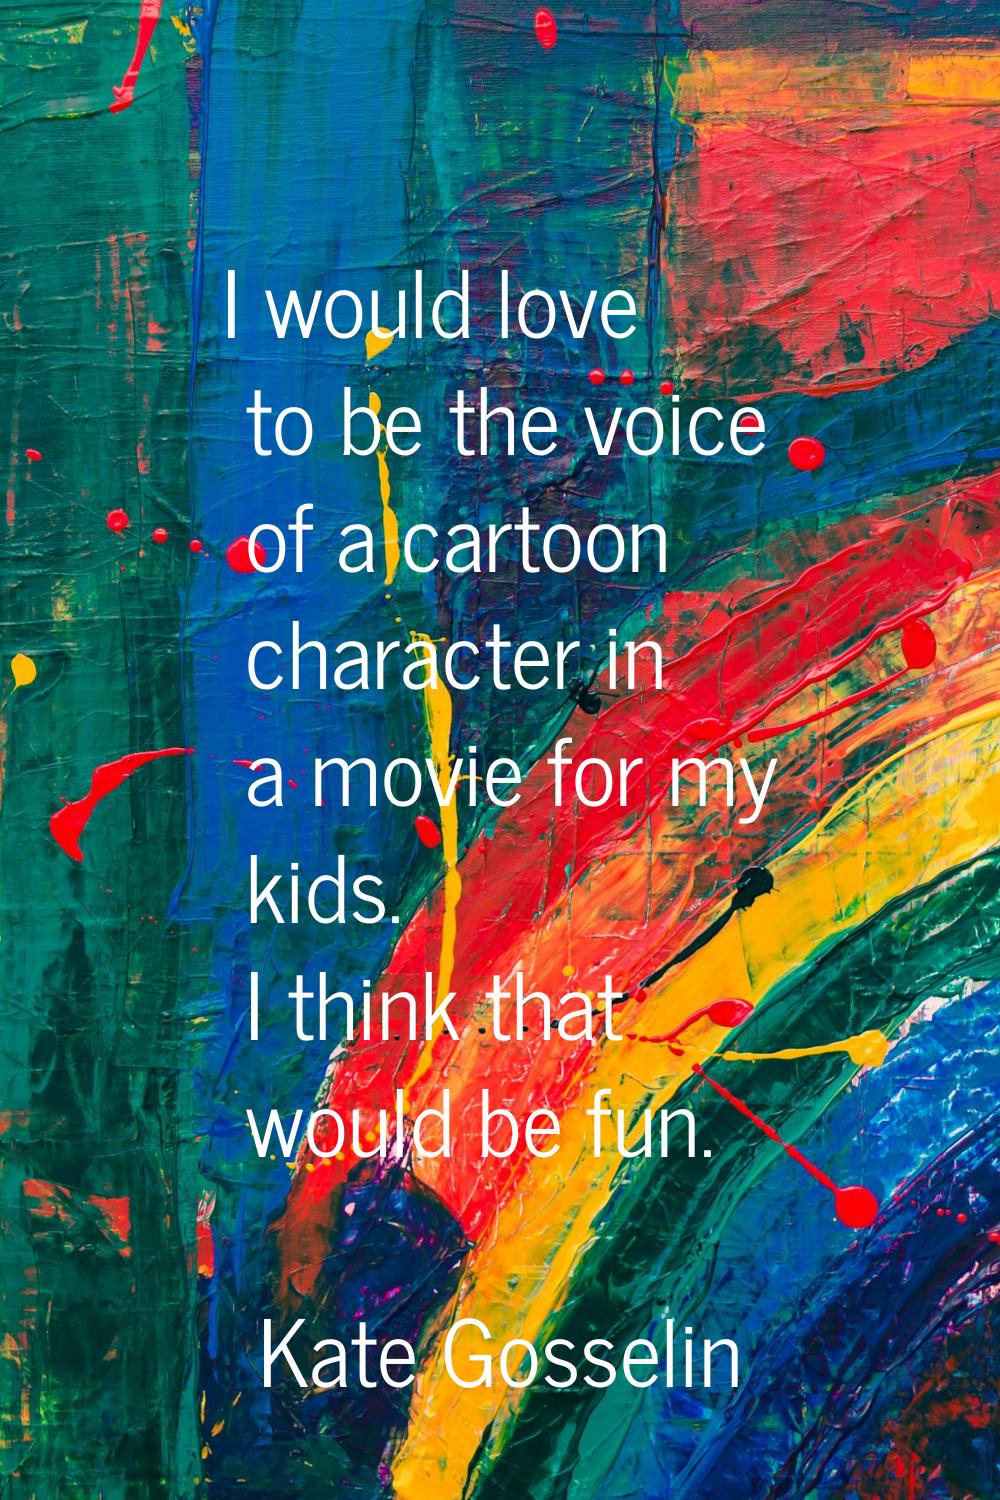 I would love to be the voice of a cartoon character in a movie for my kids. I think that would be f